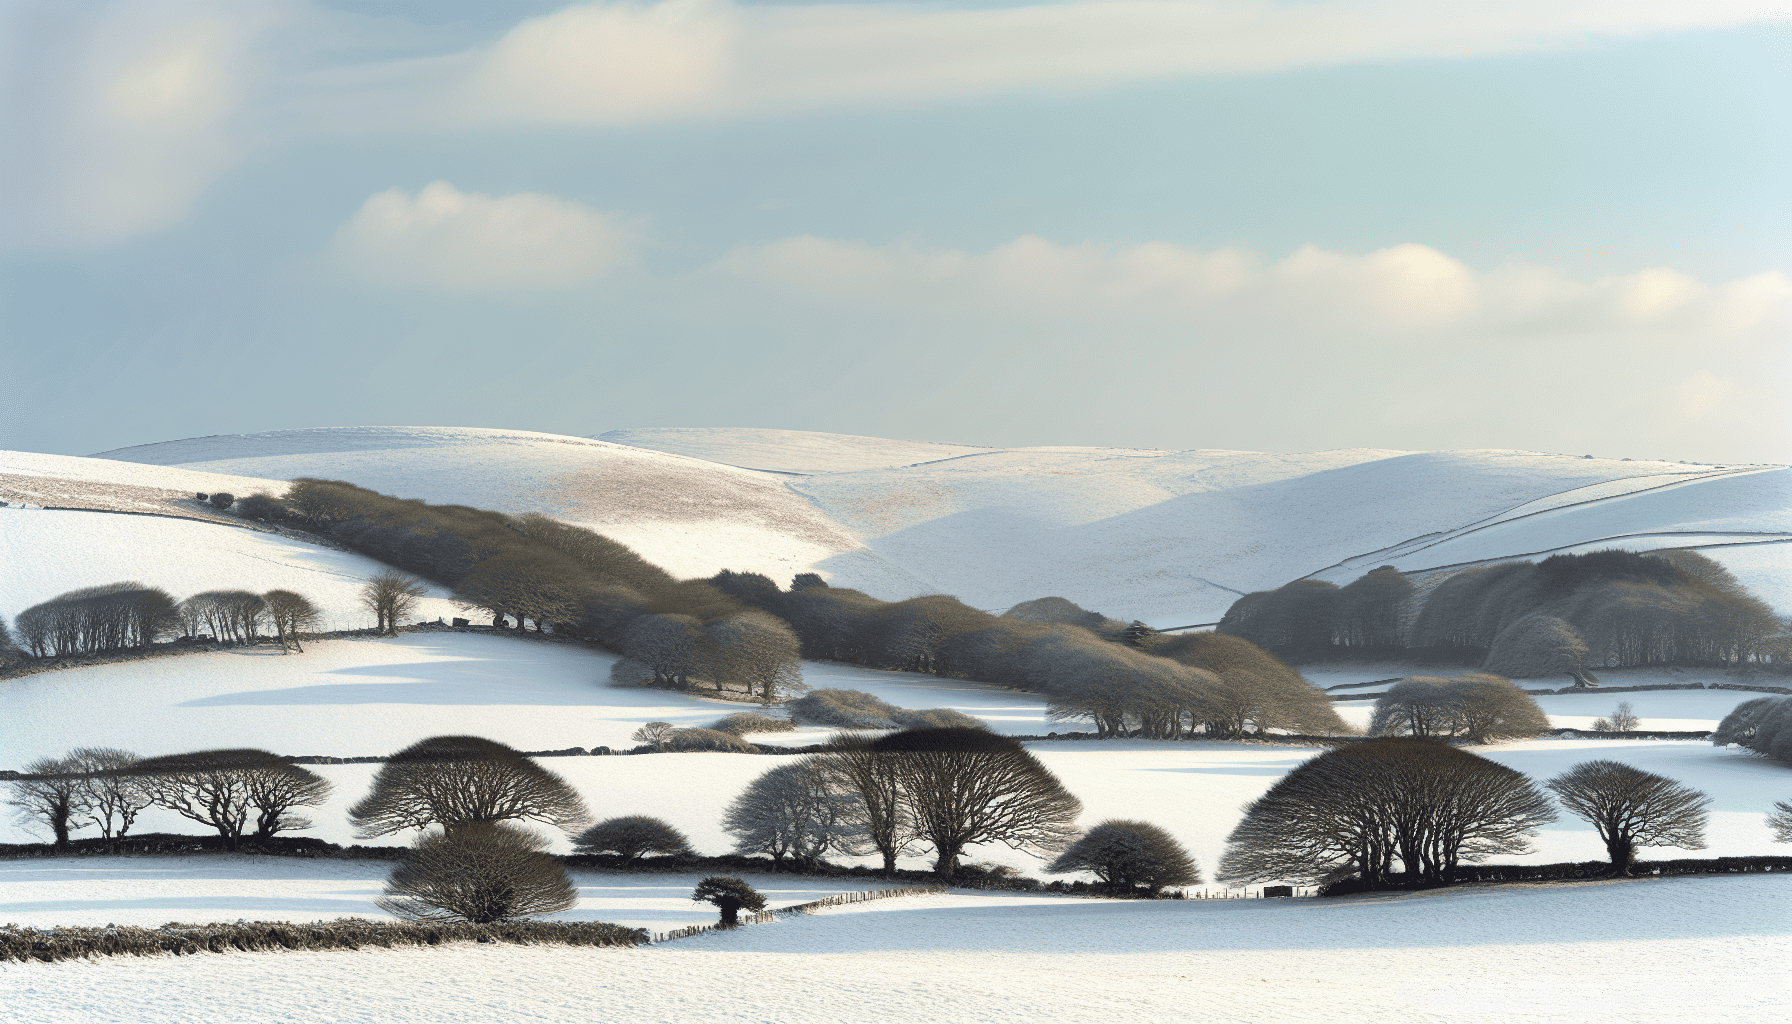 Snow-covered landscape in Ireland during winter